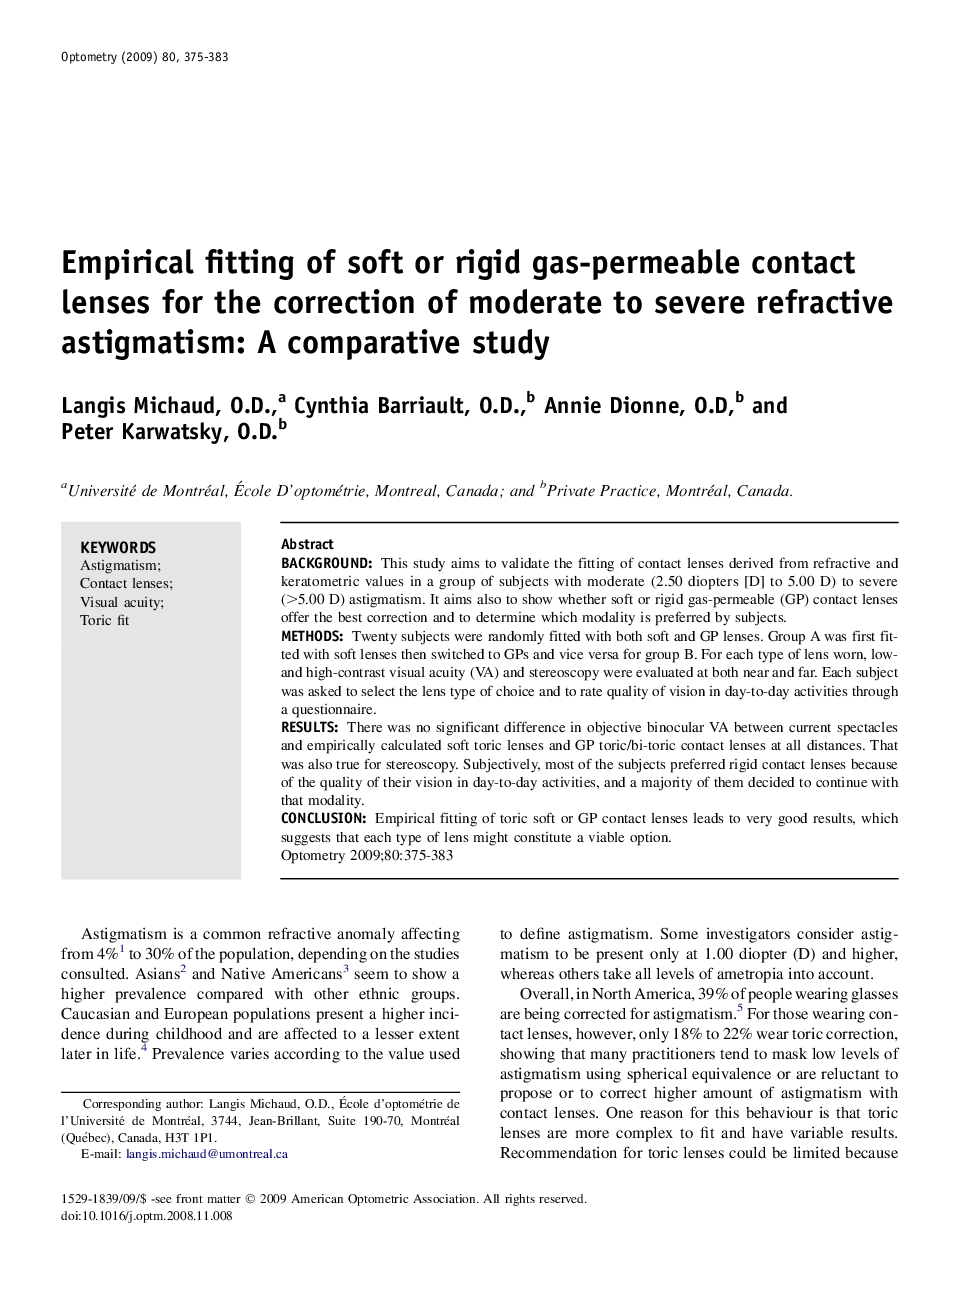 Empirical fitting of soft or rigid gas-permeable contact lenses for the correction of moderate to severe refractive astigmatism: A comparative study